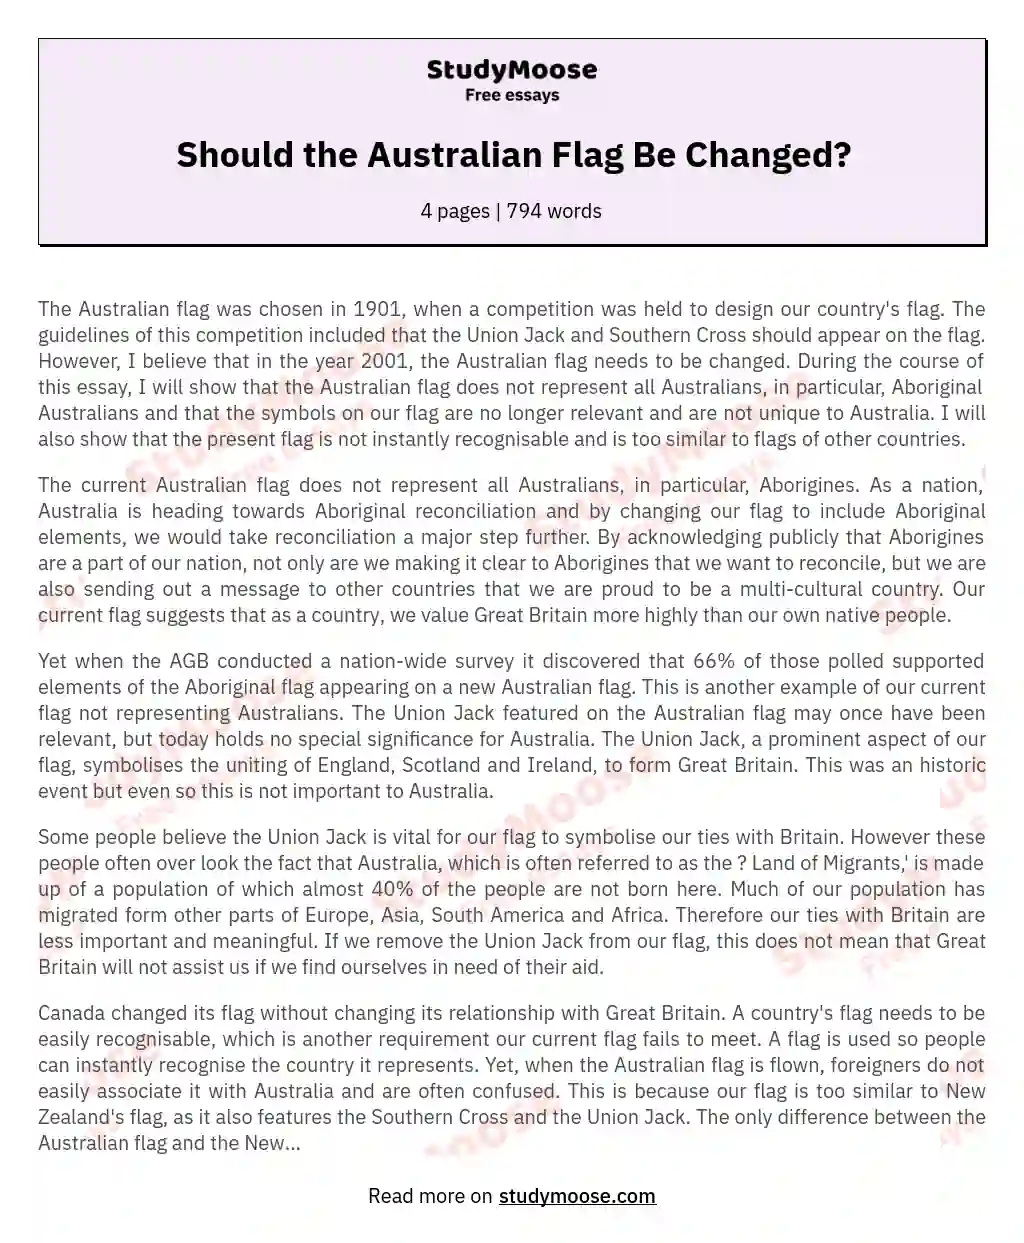 Should the Australian Flag Be Changed? essay